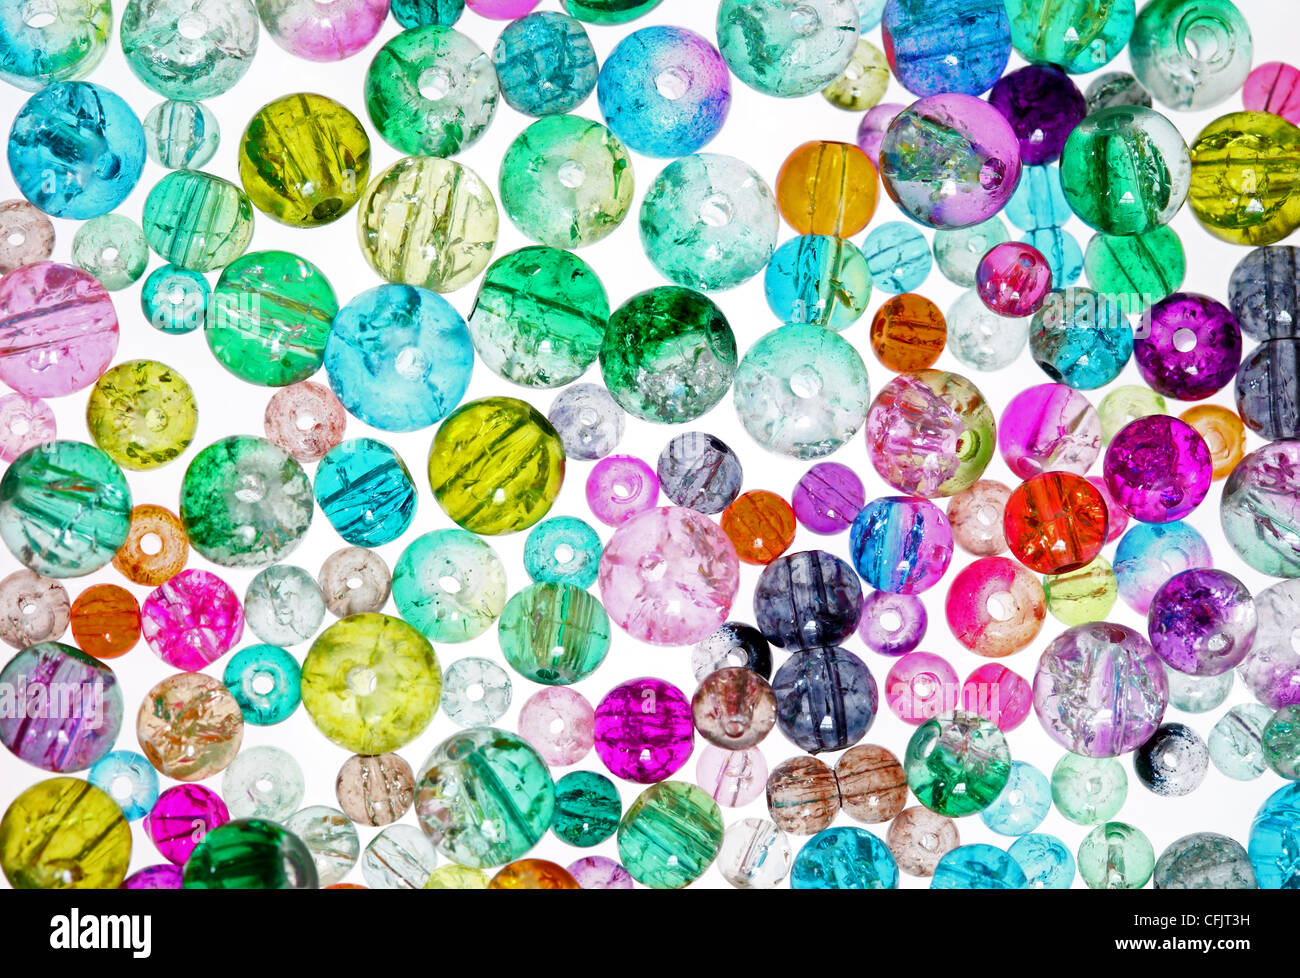 High Key Image of Colourful Glass Jewellery Making Beads on a White Background Stock Photo